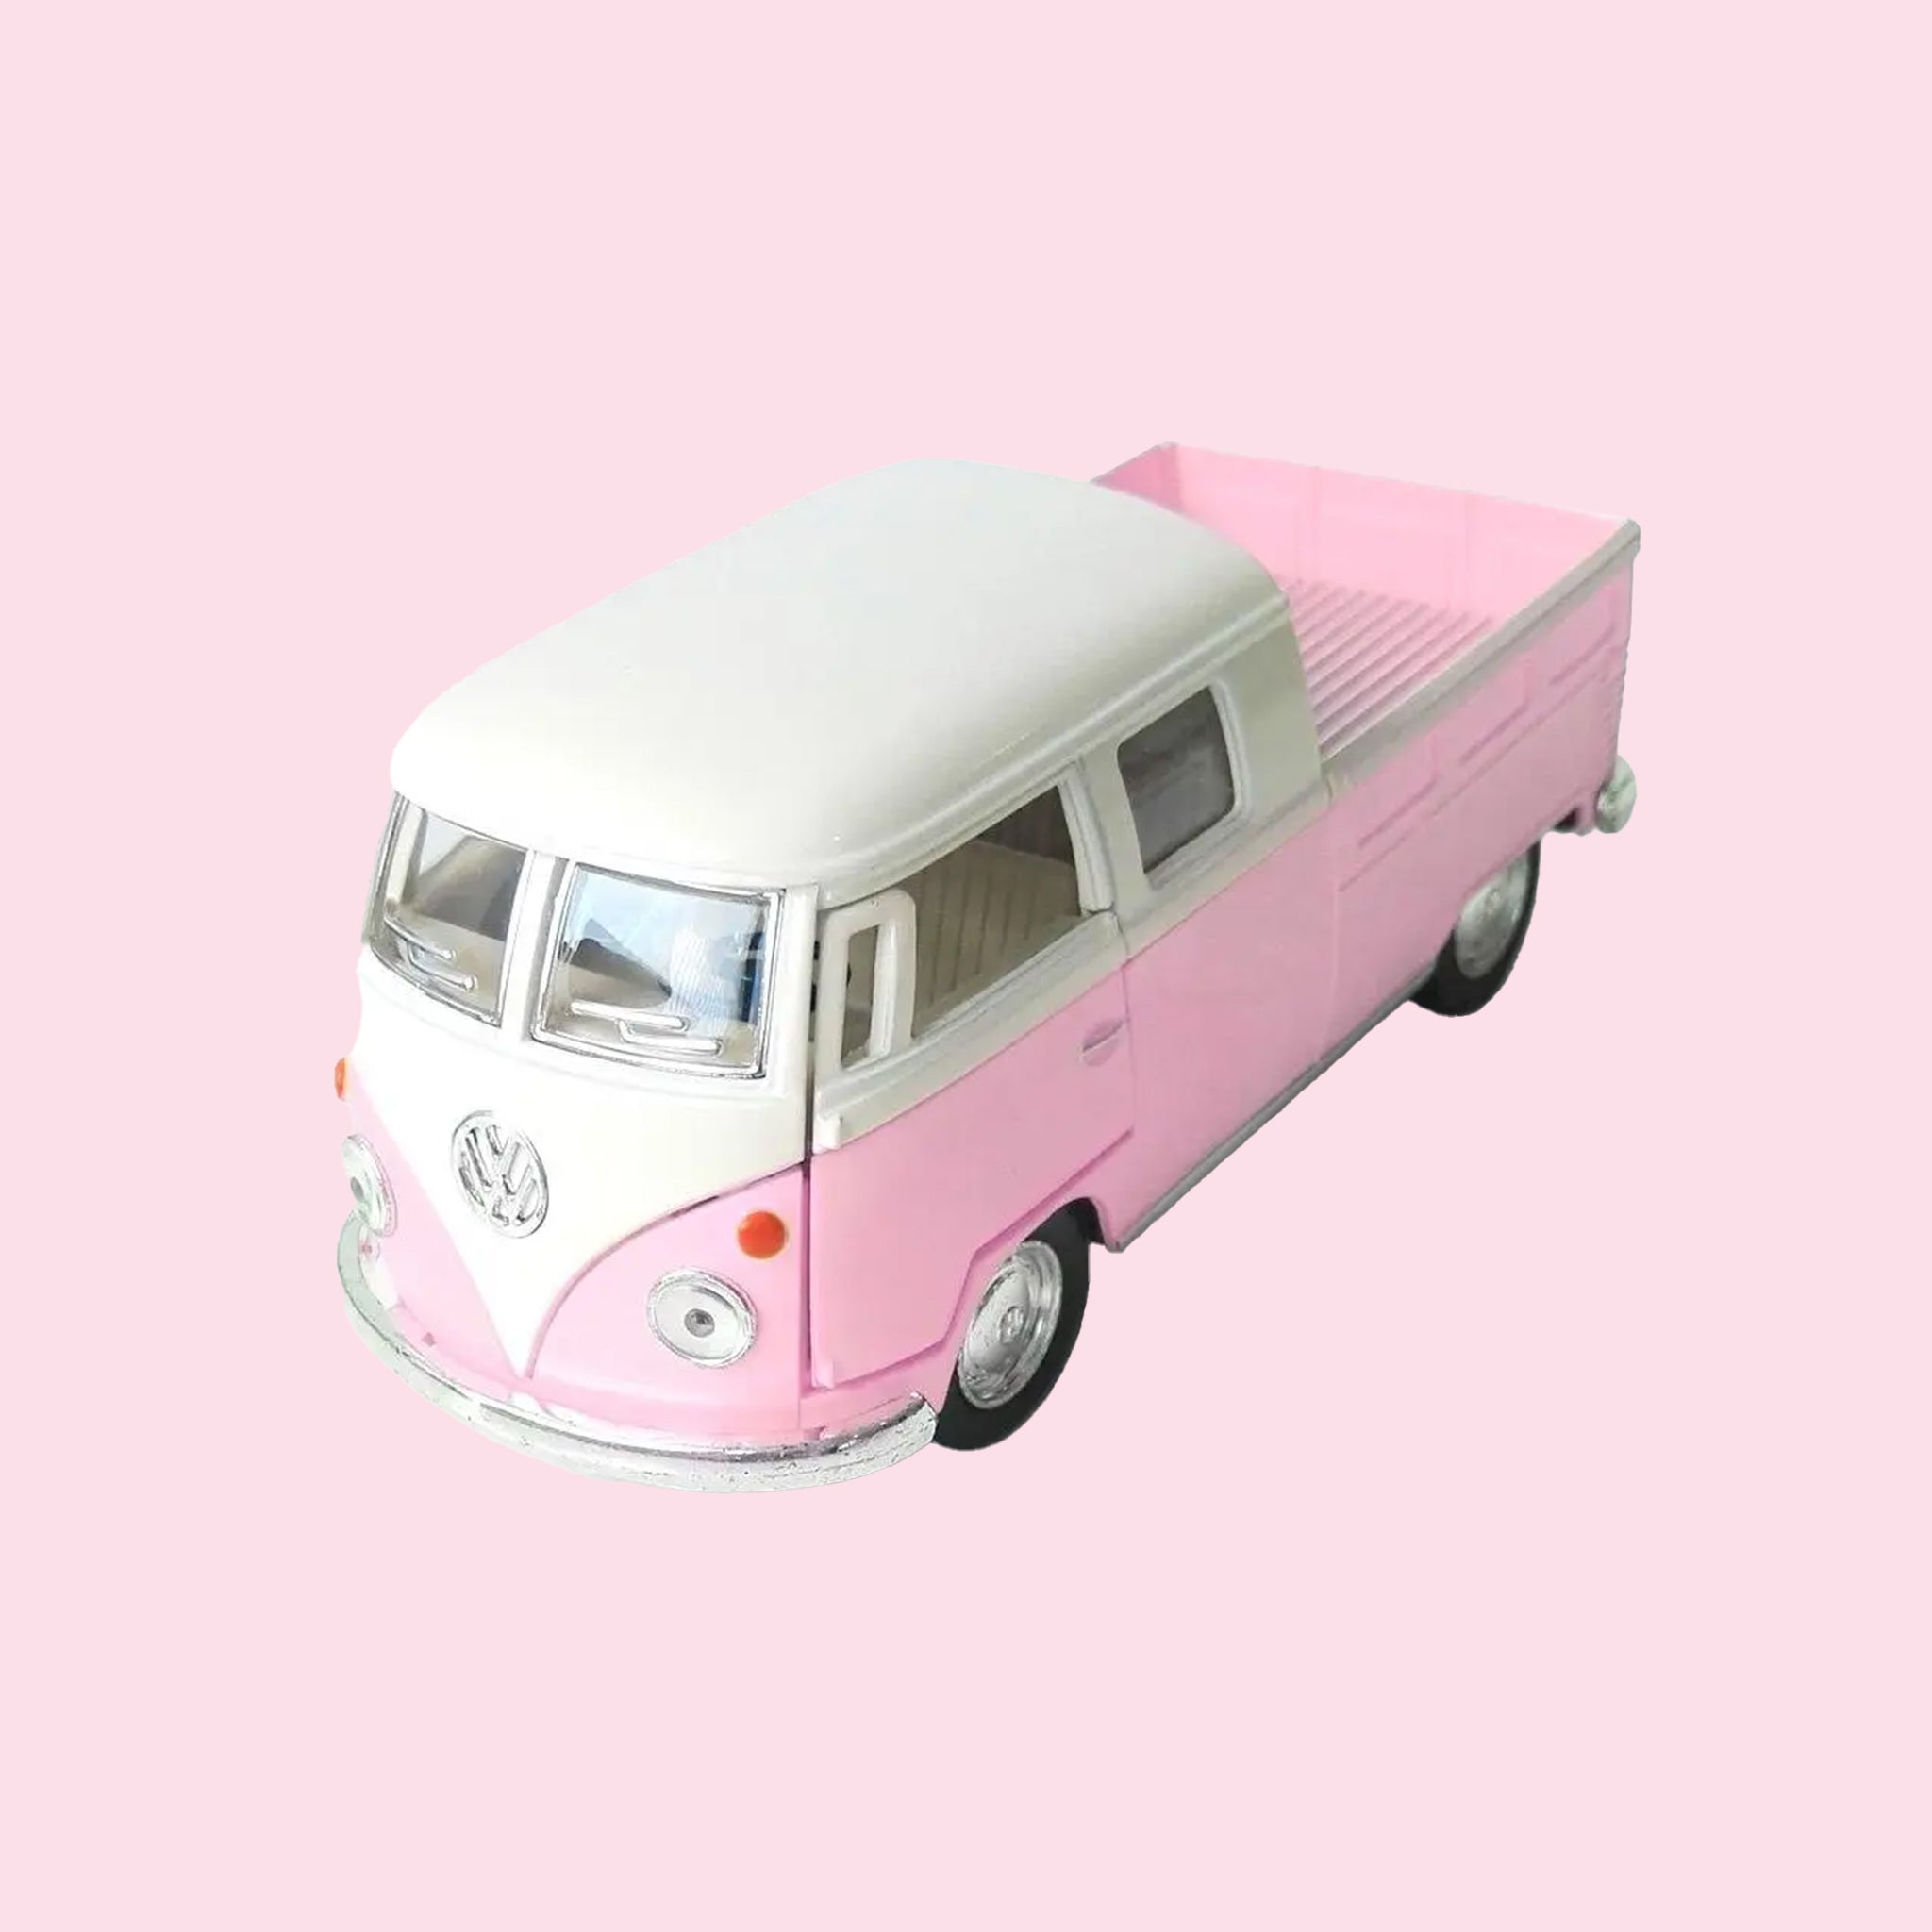 A pink and white VW van truck replica toy. 